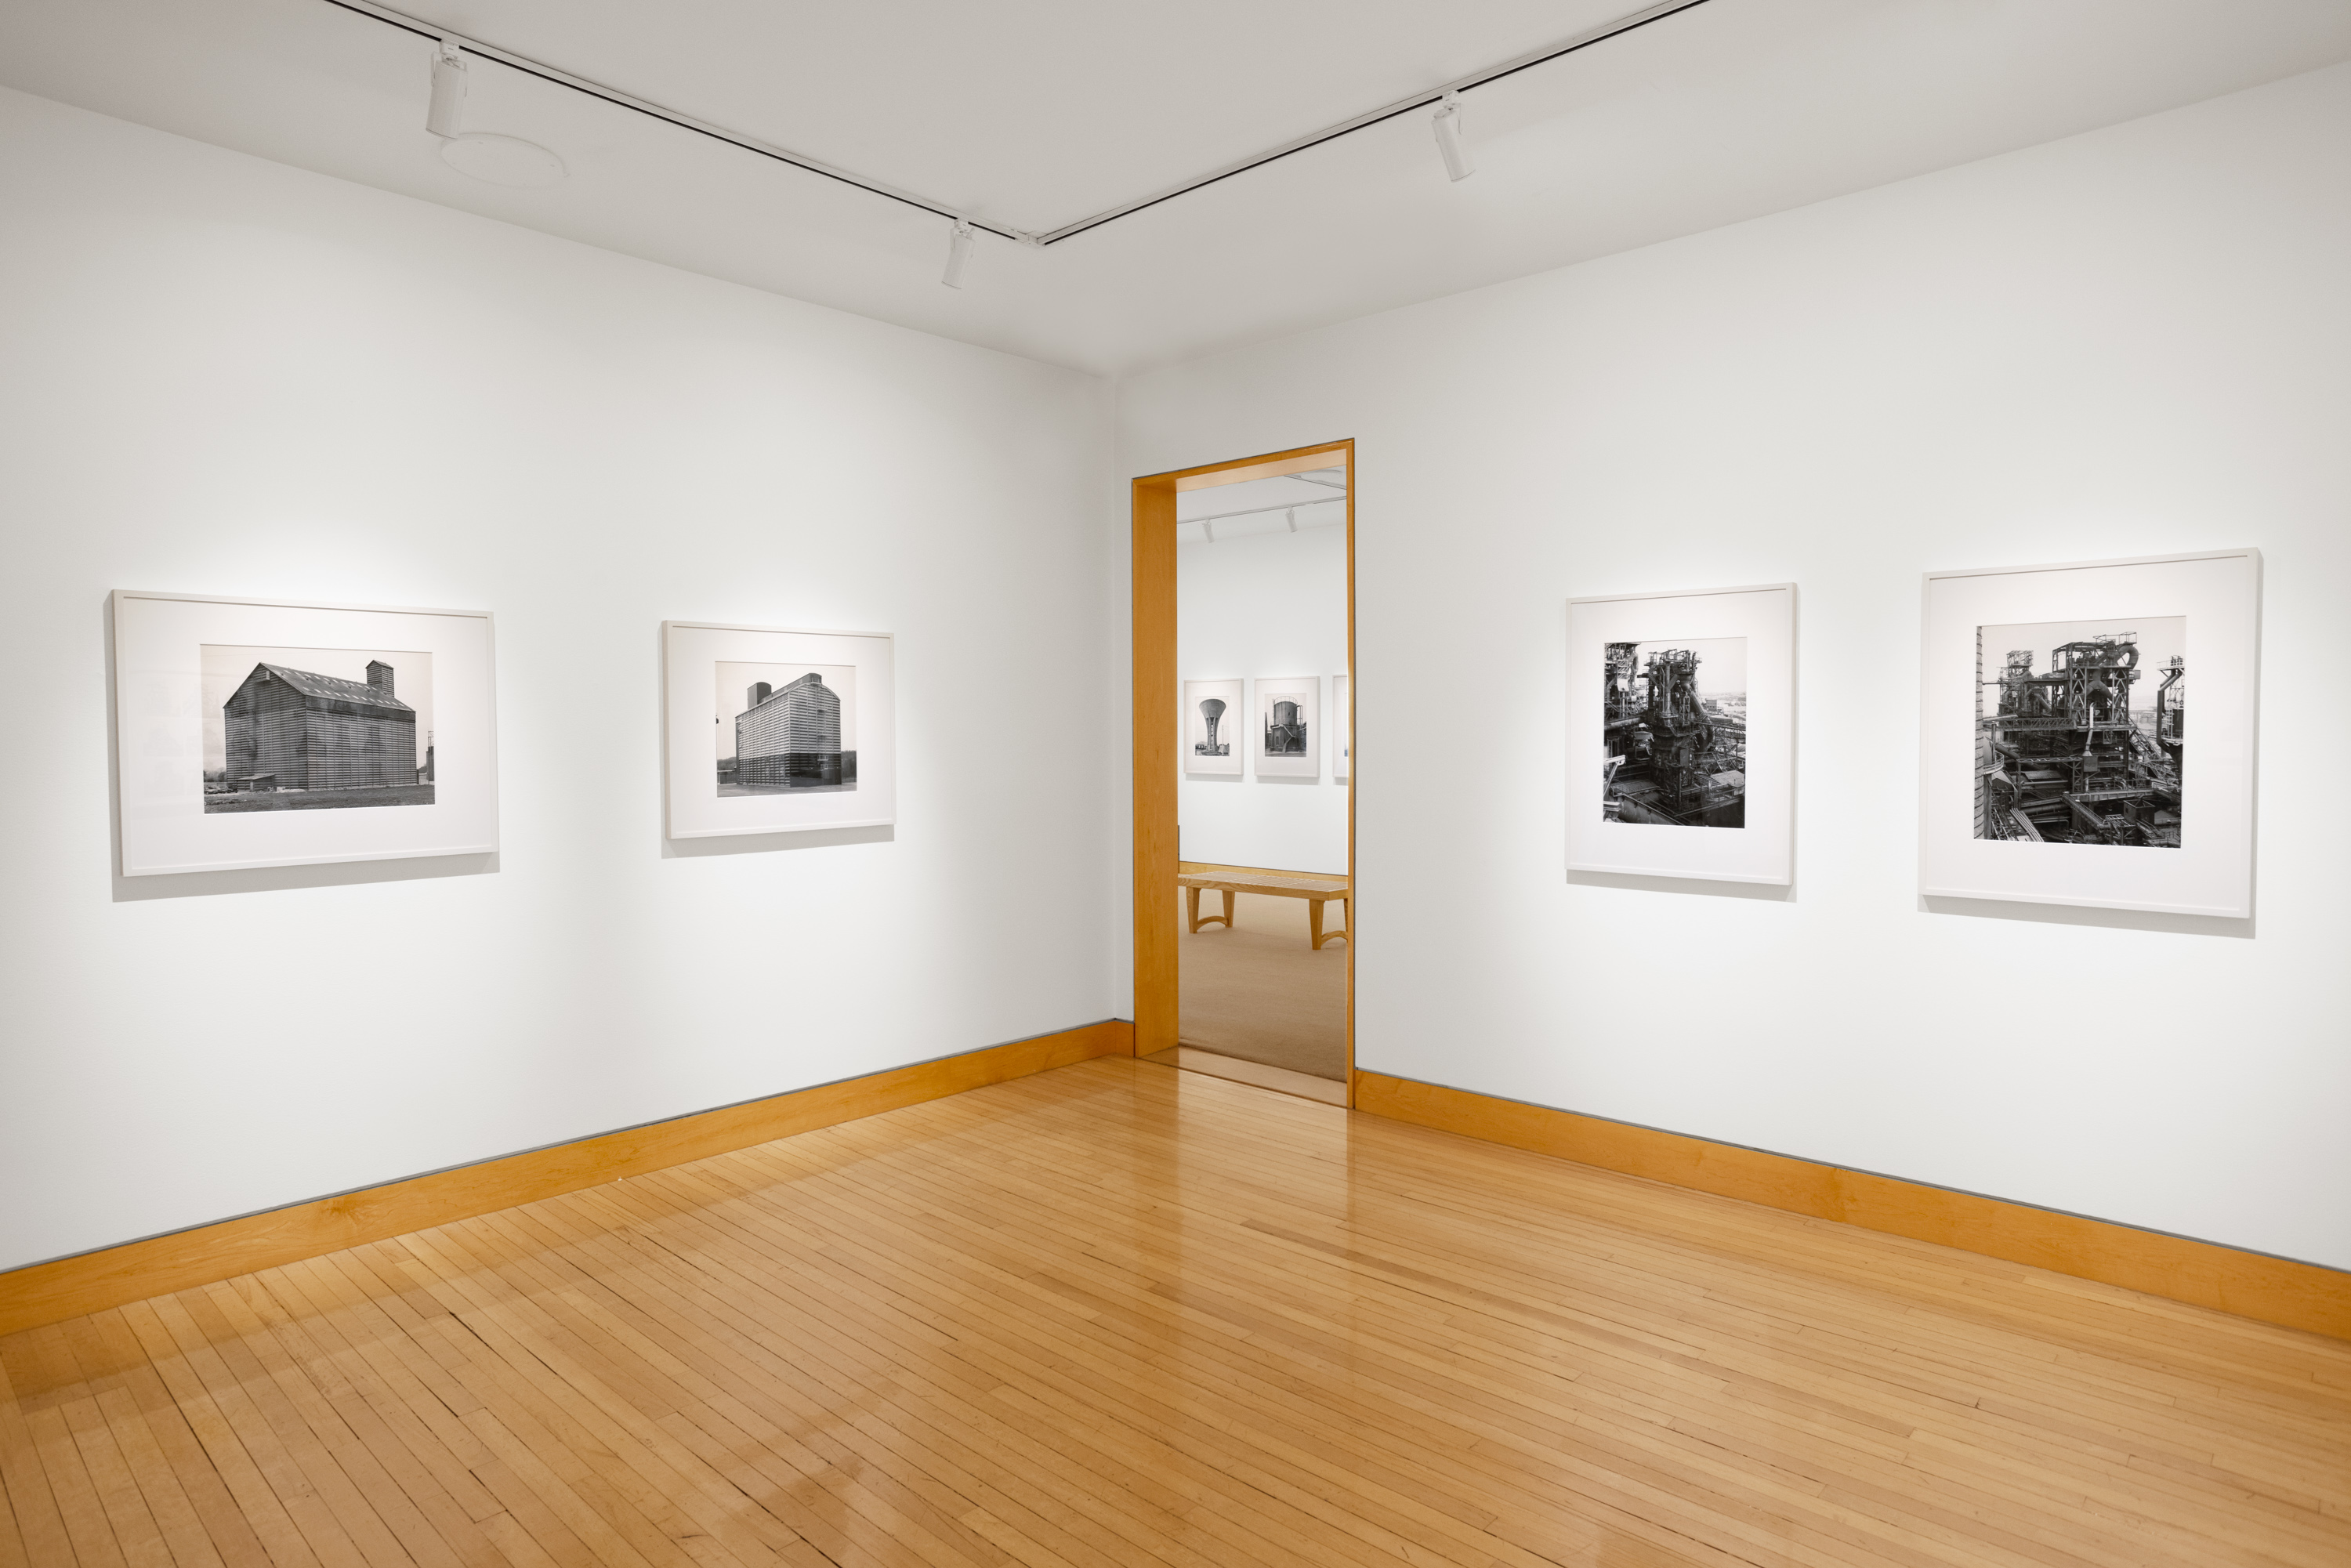 Color image of black and white photographs of various water towers and grain silos framed in white on white gallery walls